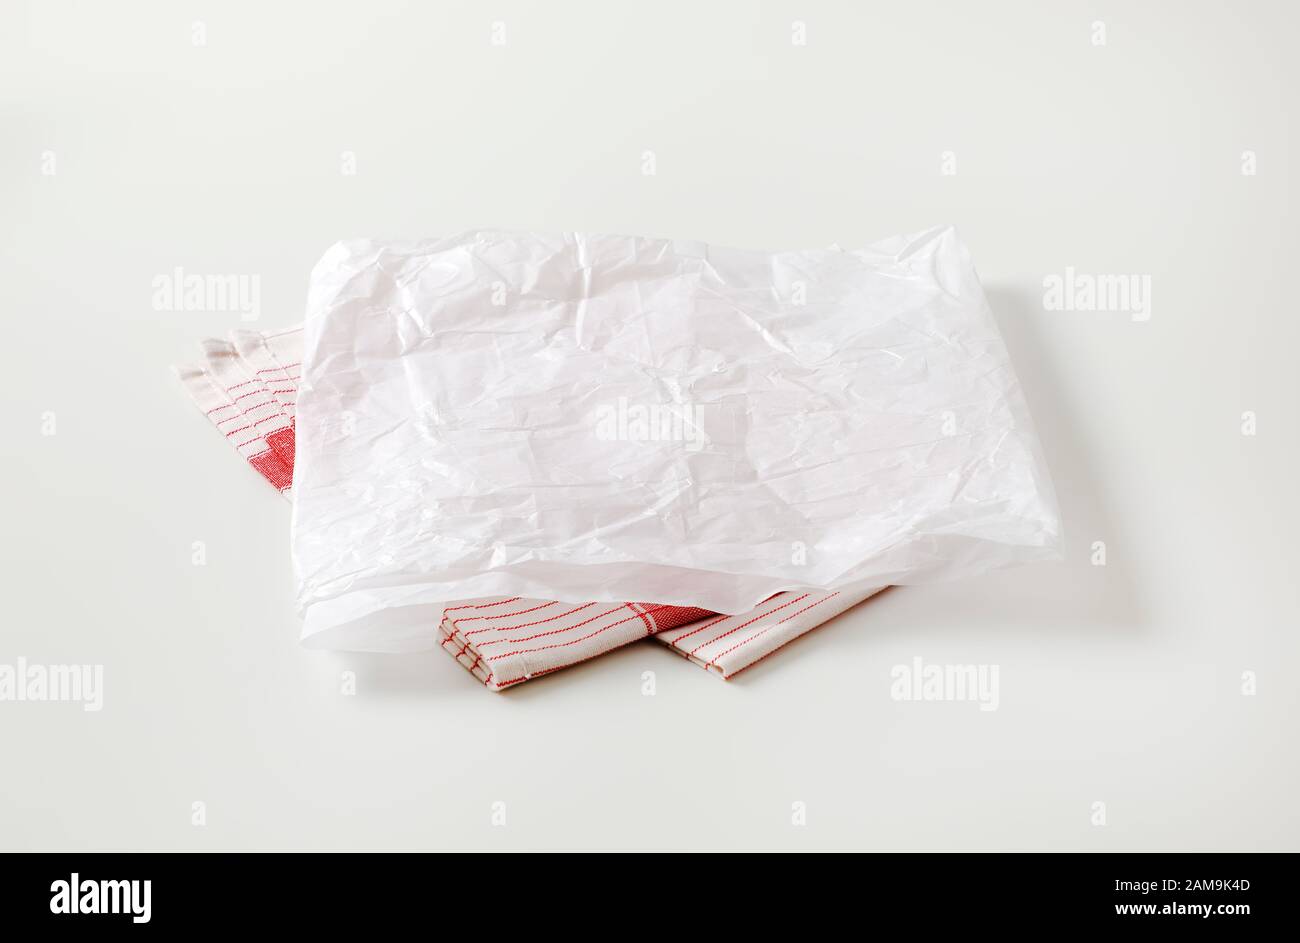 Creased sheet of white wax paper (butcher paper) on tea towel Stock Photo